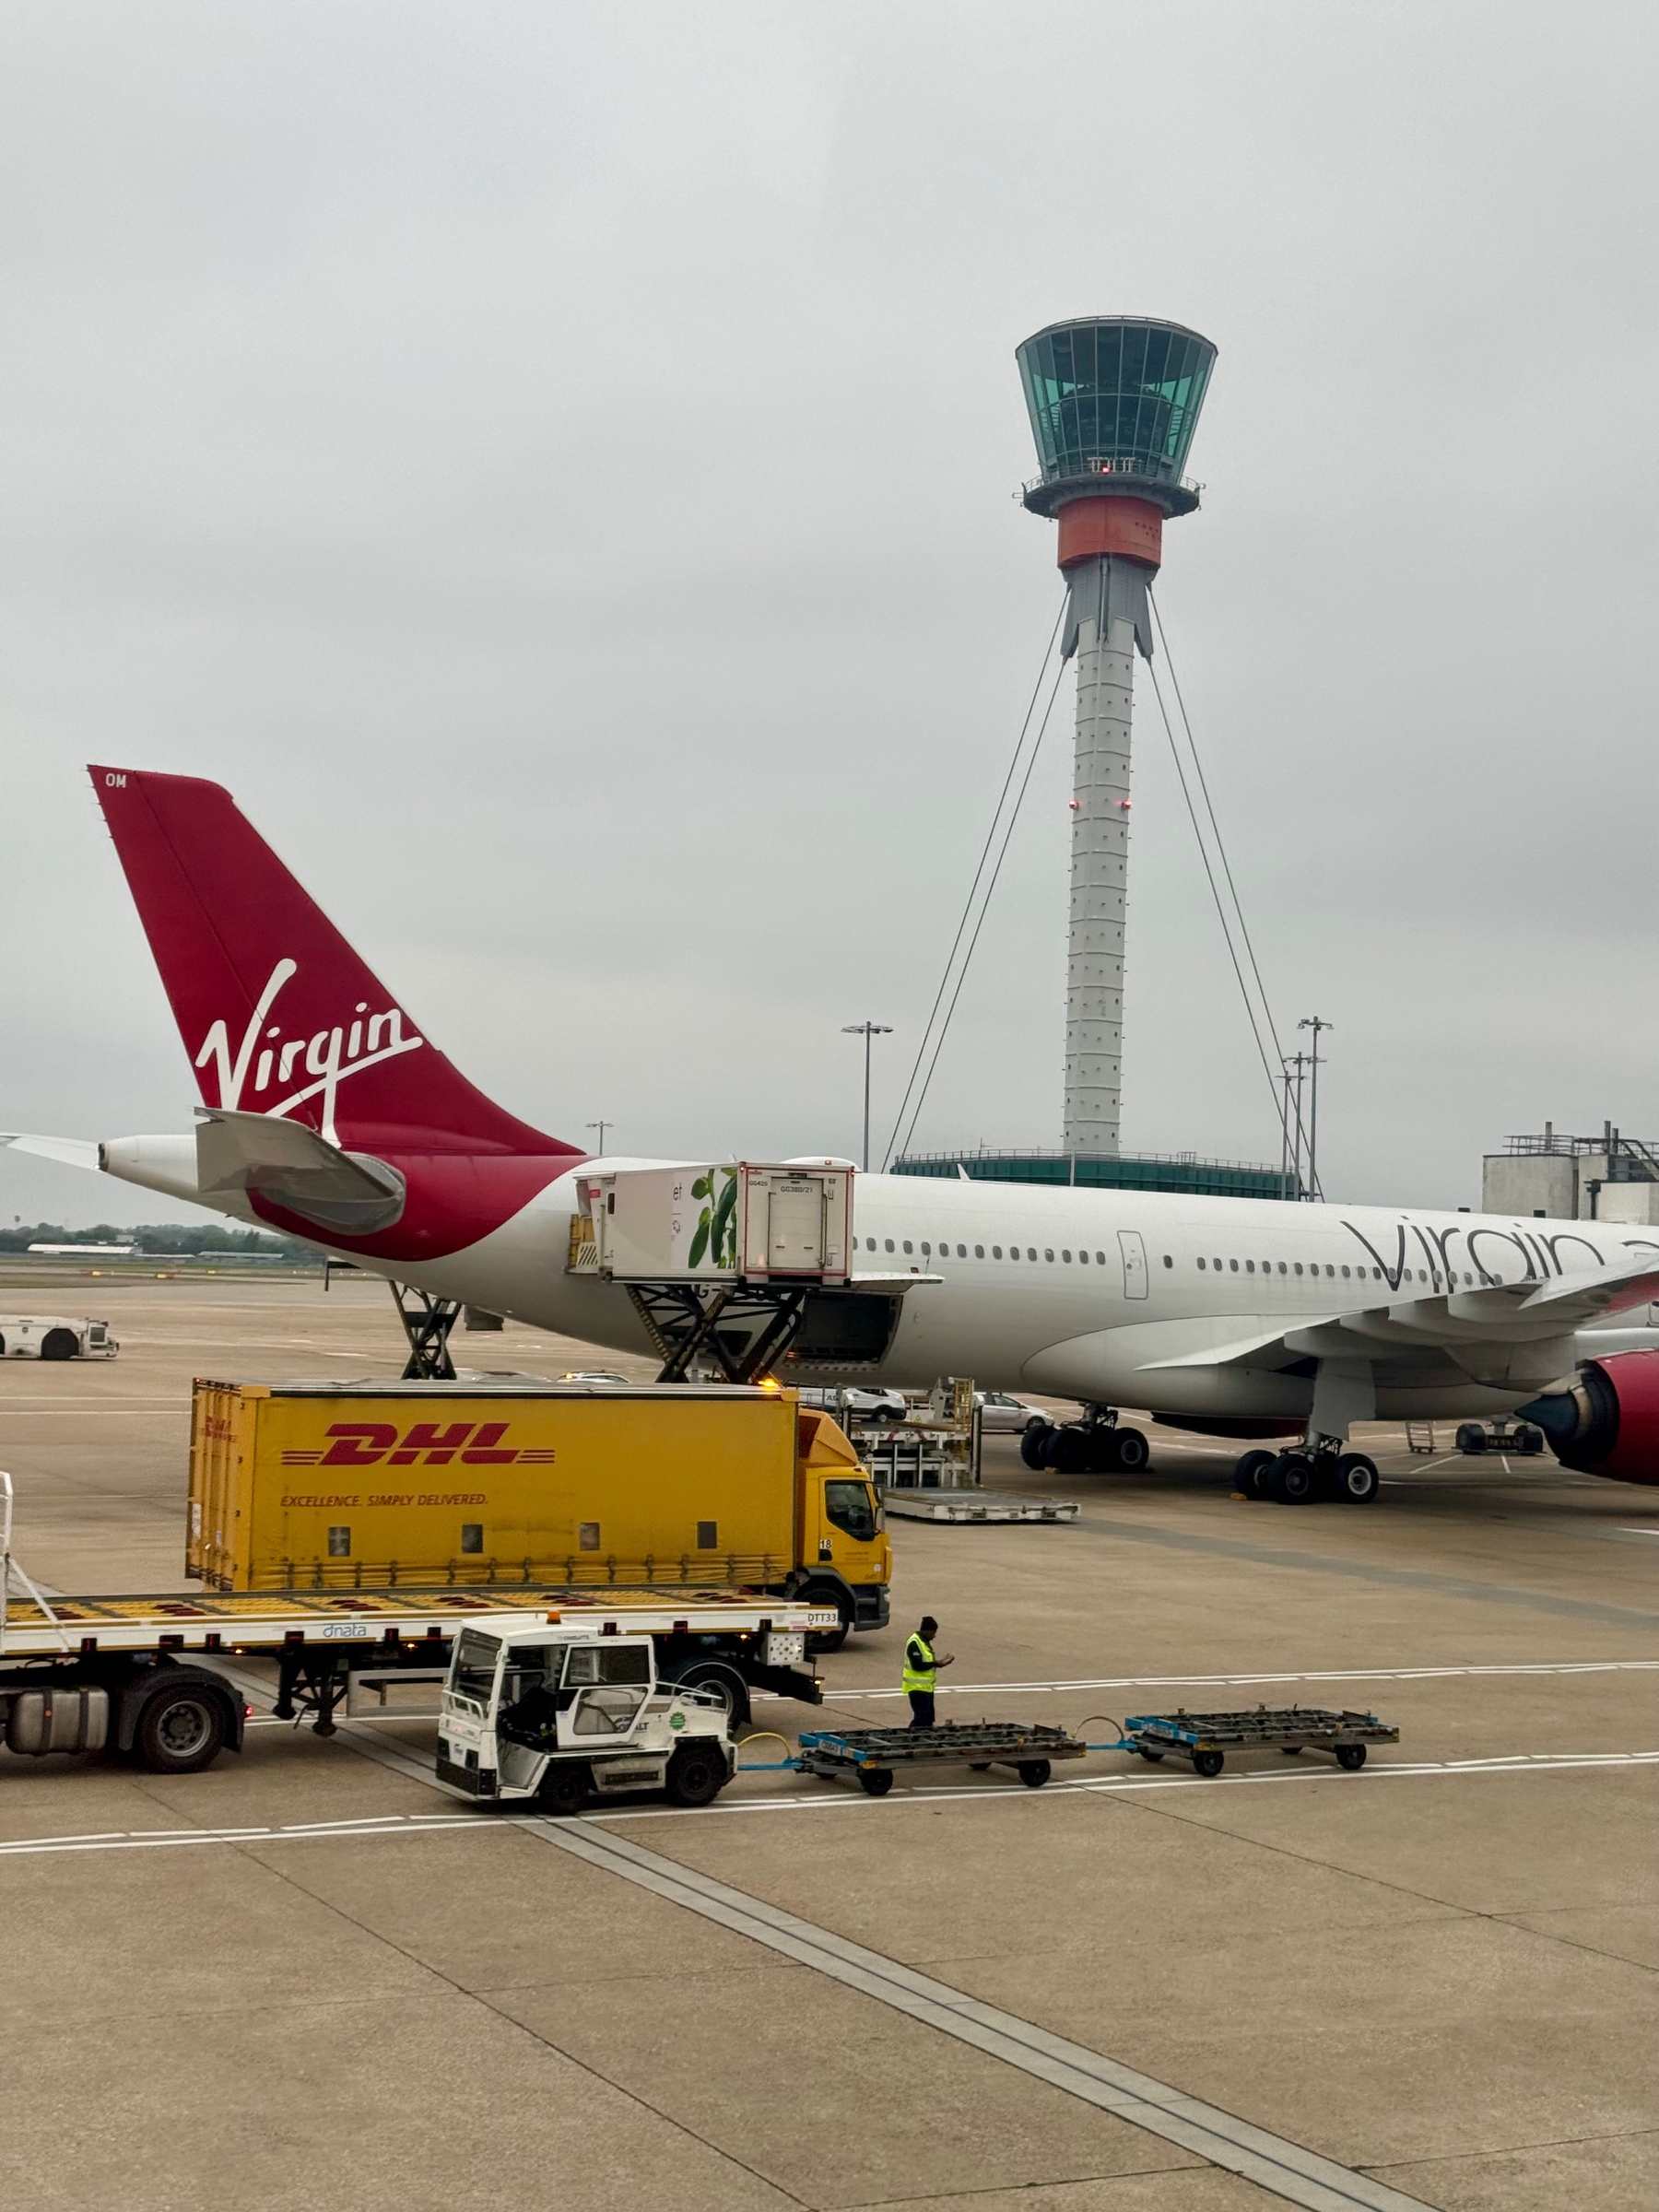 An airport apron with a Virgin airline aircraft, a DHL delivery truck, a baggage tug, an air traffic control tower, and a ground crew member wearing a hi-vis vest.